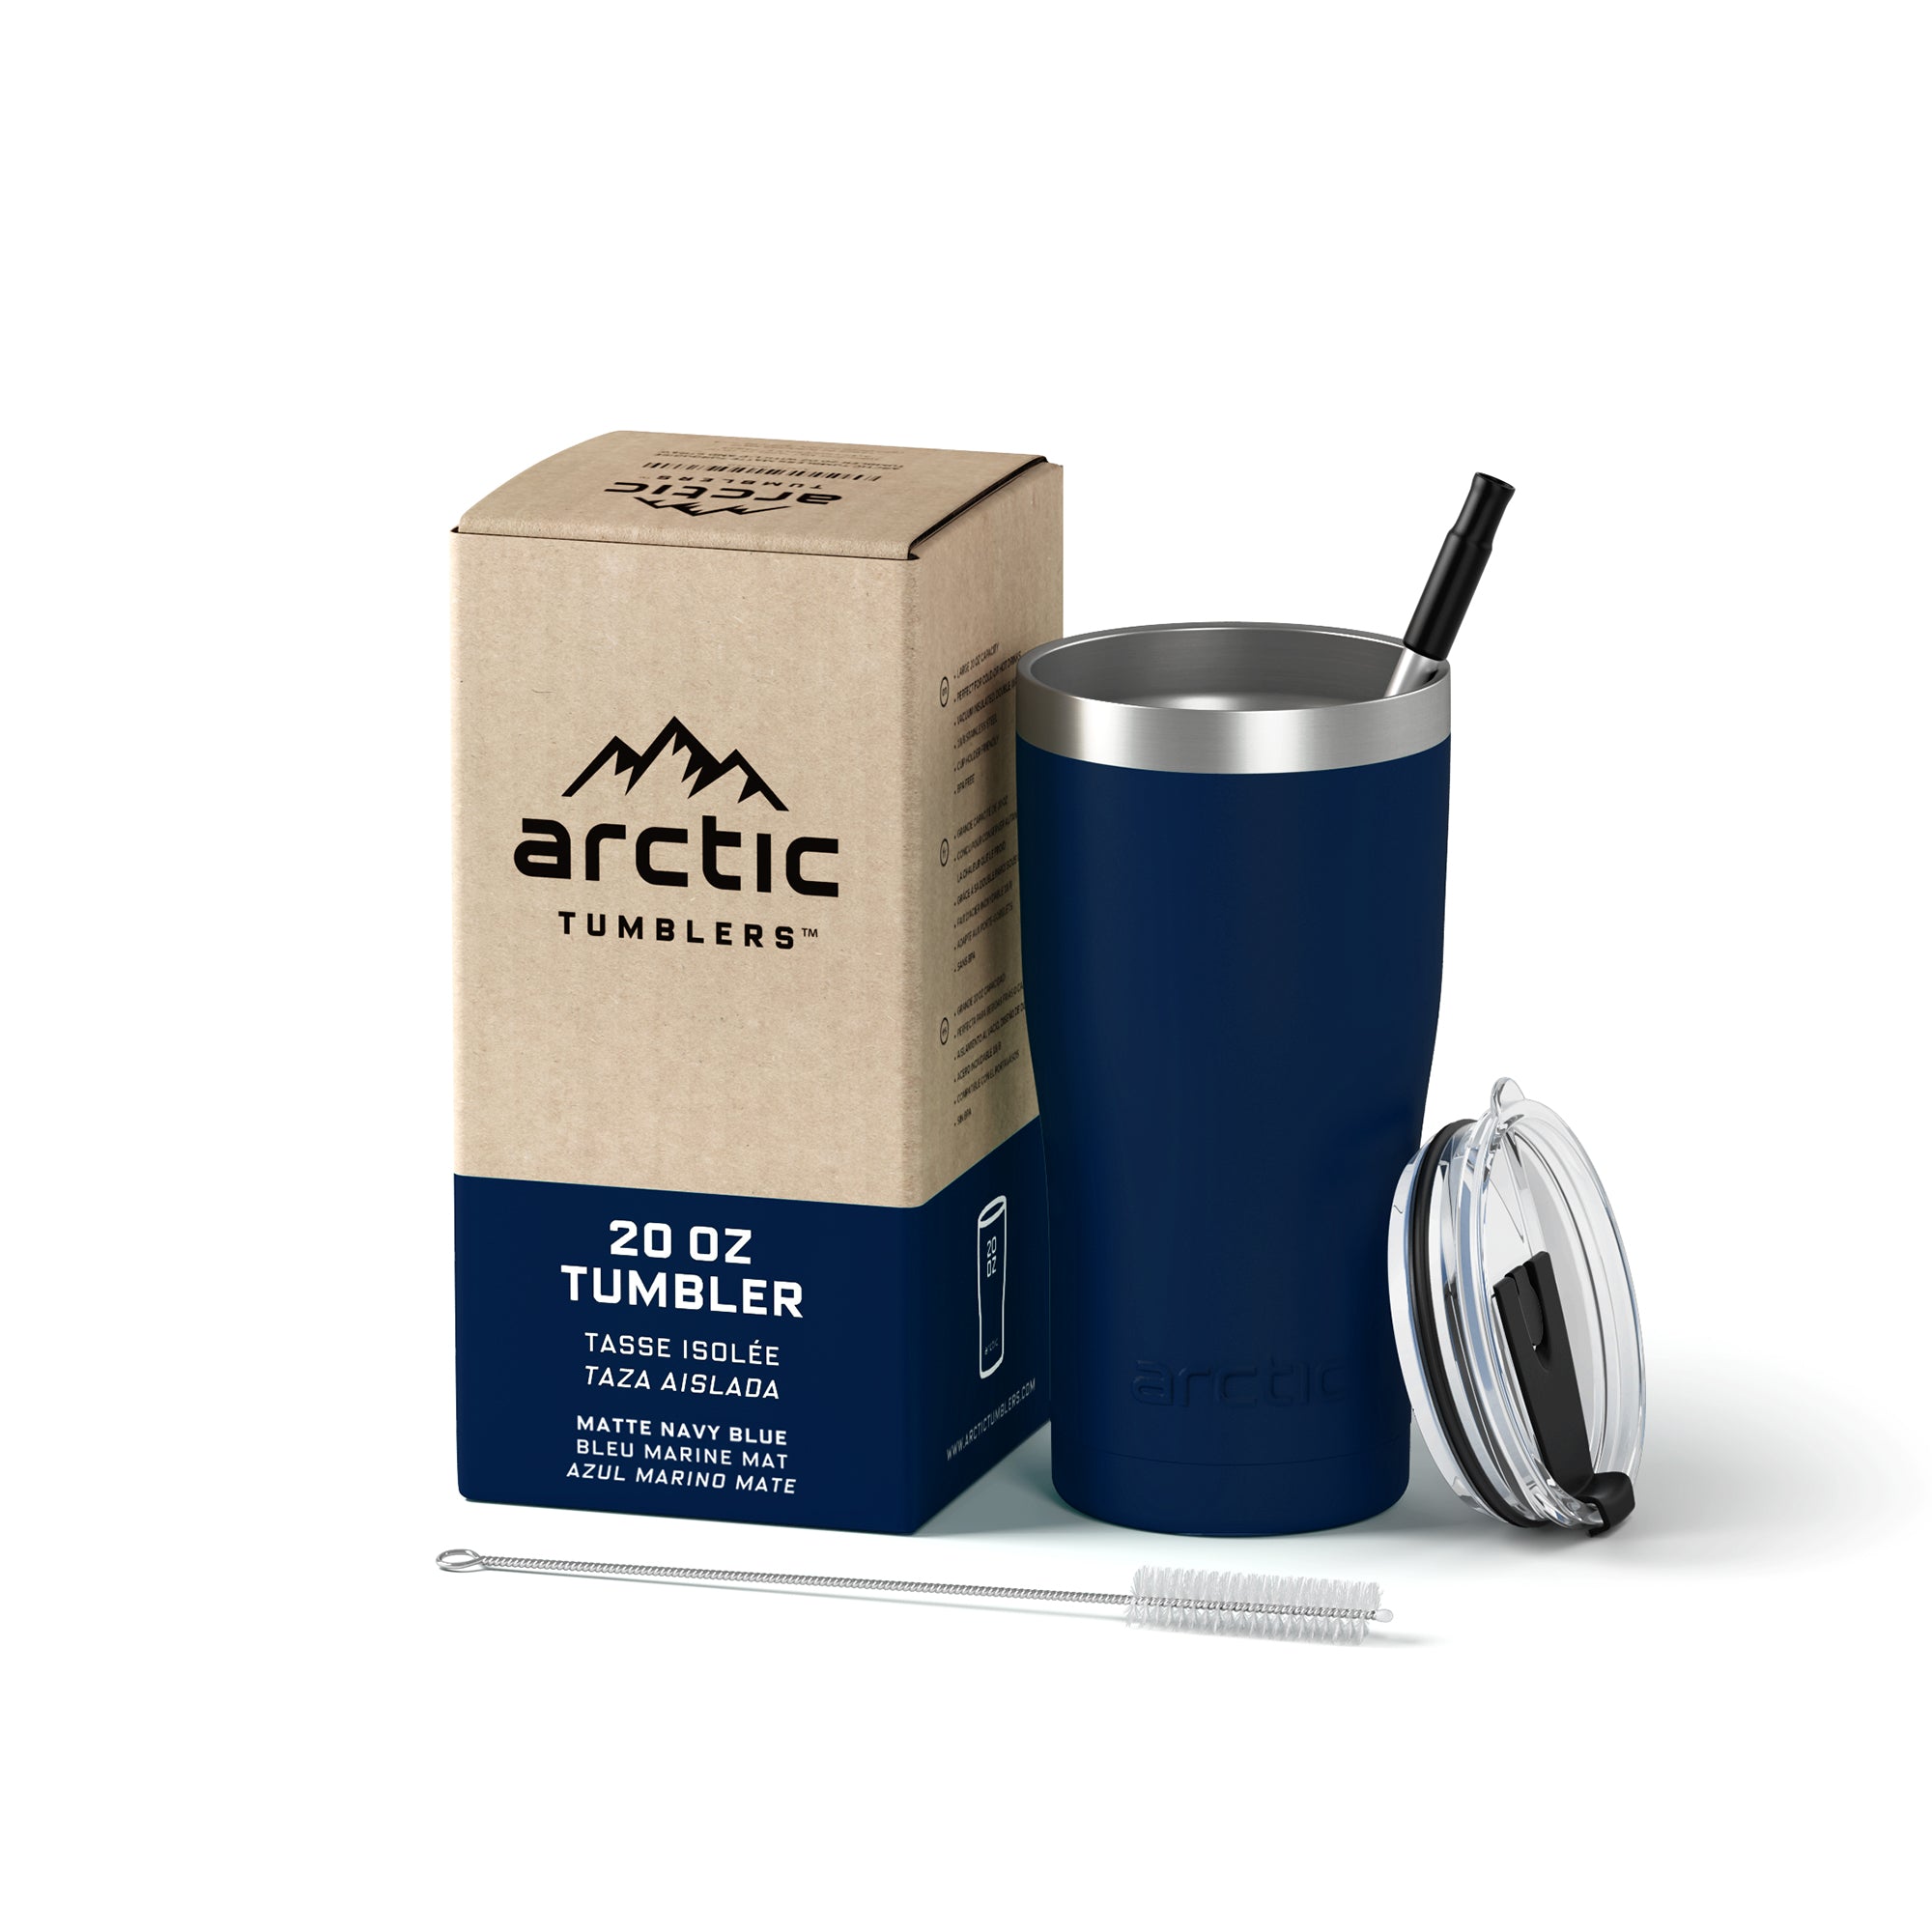 Arctica Stainless Steel Vacuum Insulated Tumblers - 30 Oz. - Bed Bath &  Beyond - 15051354